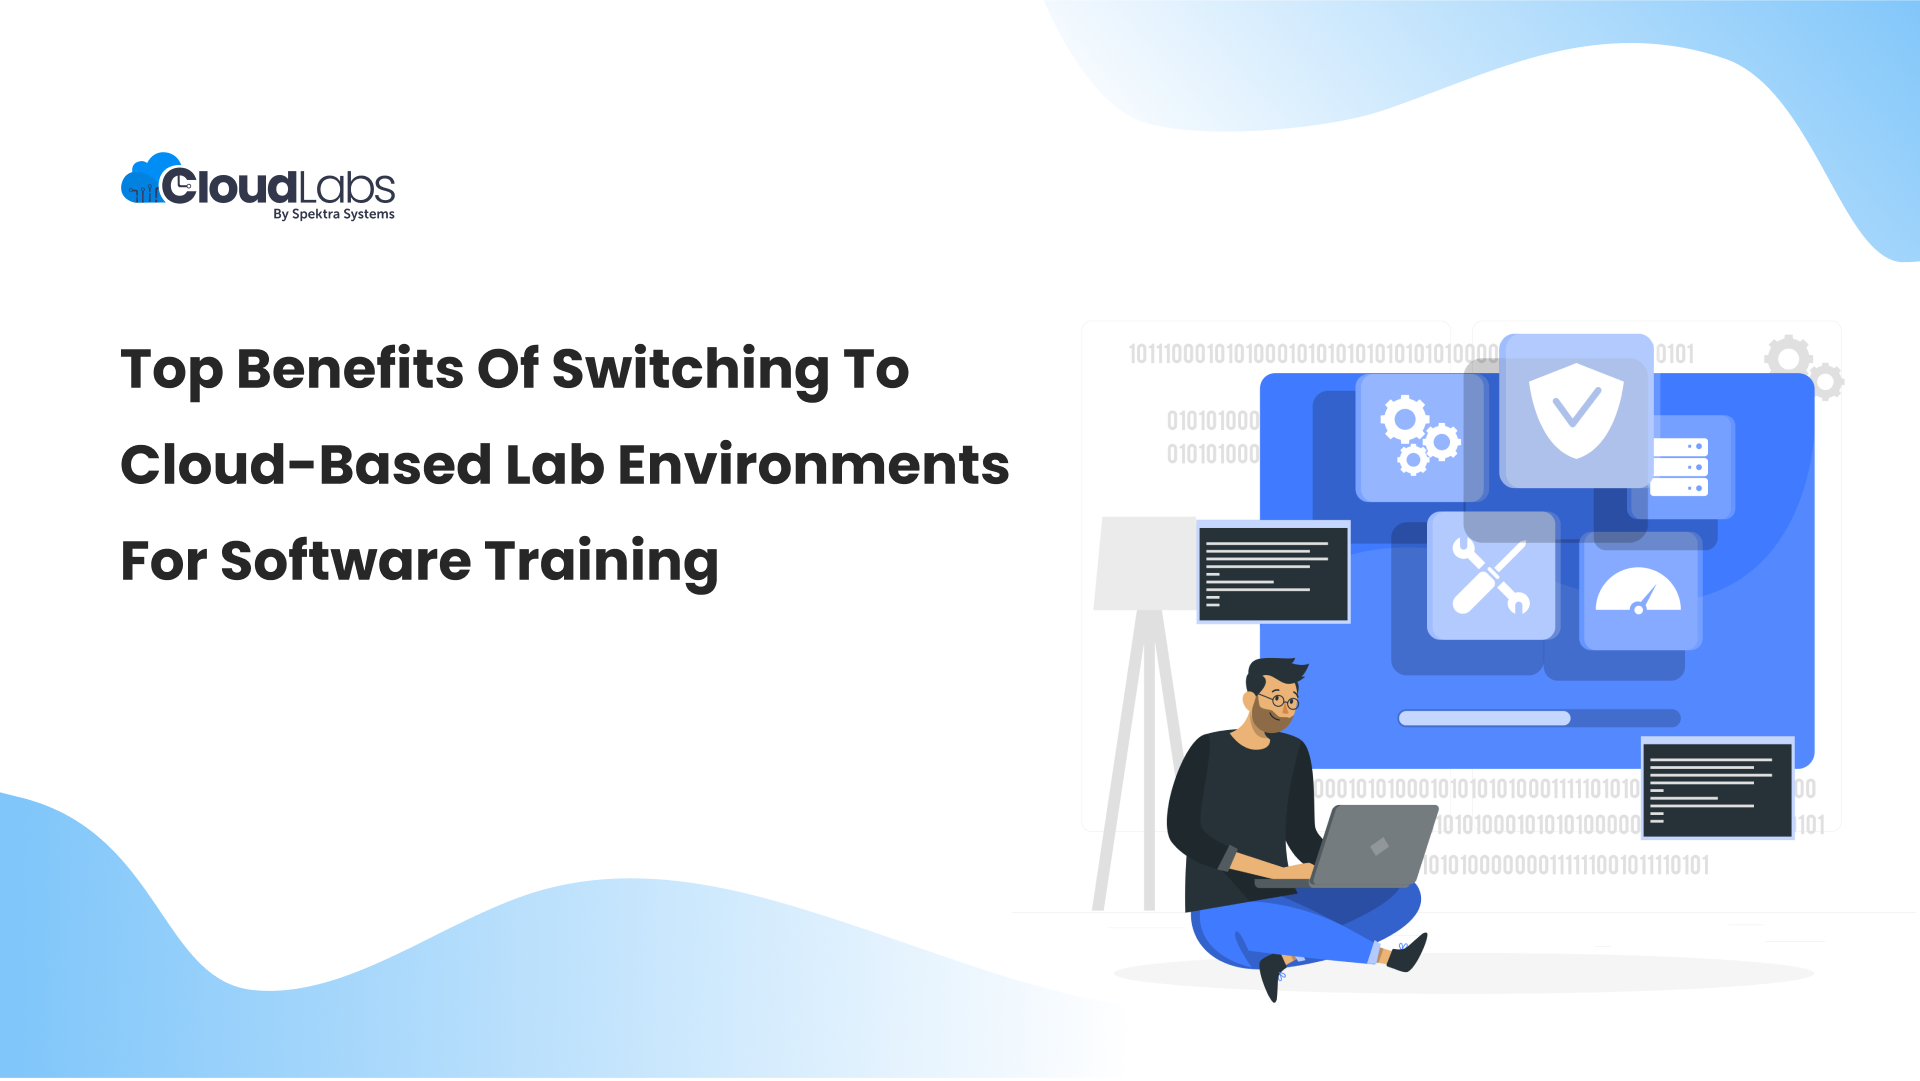 Top 8 Benefits of Switching to Cloud-Based Lab Environments for Software Training